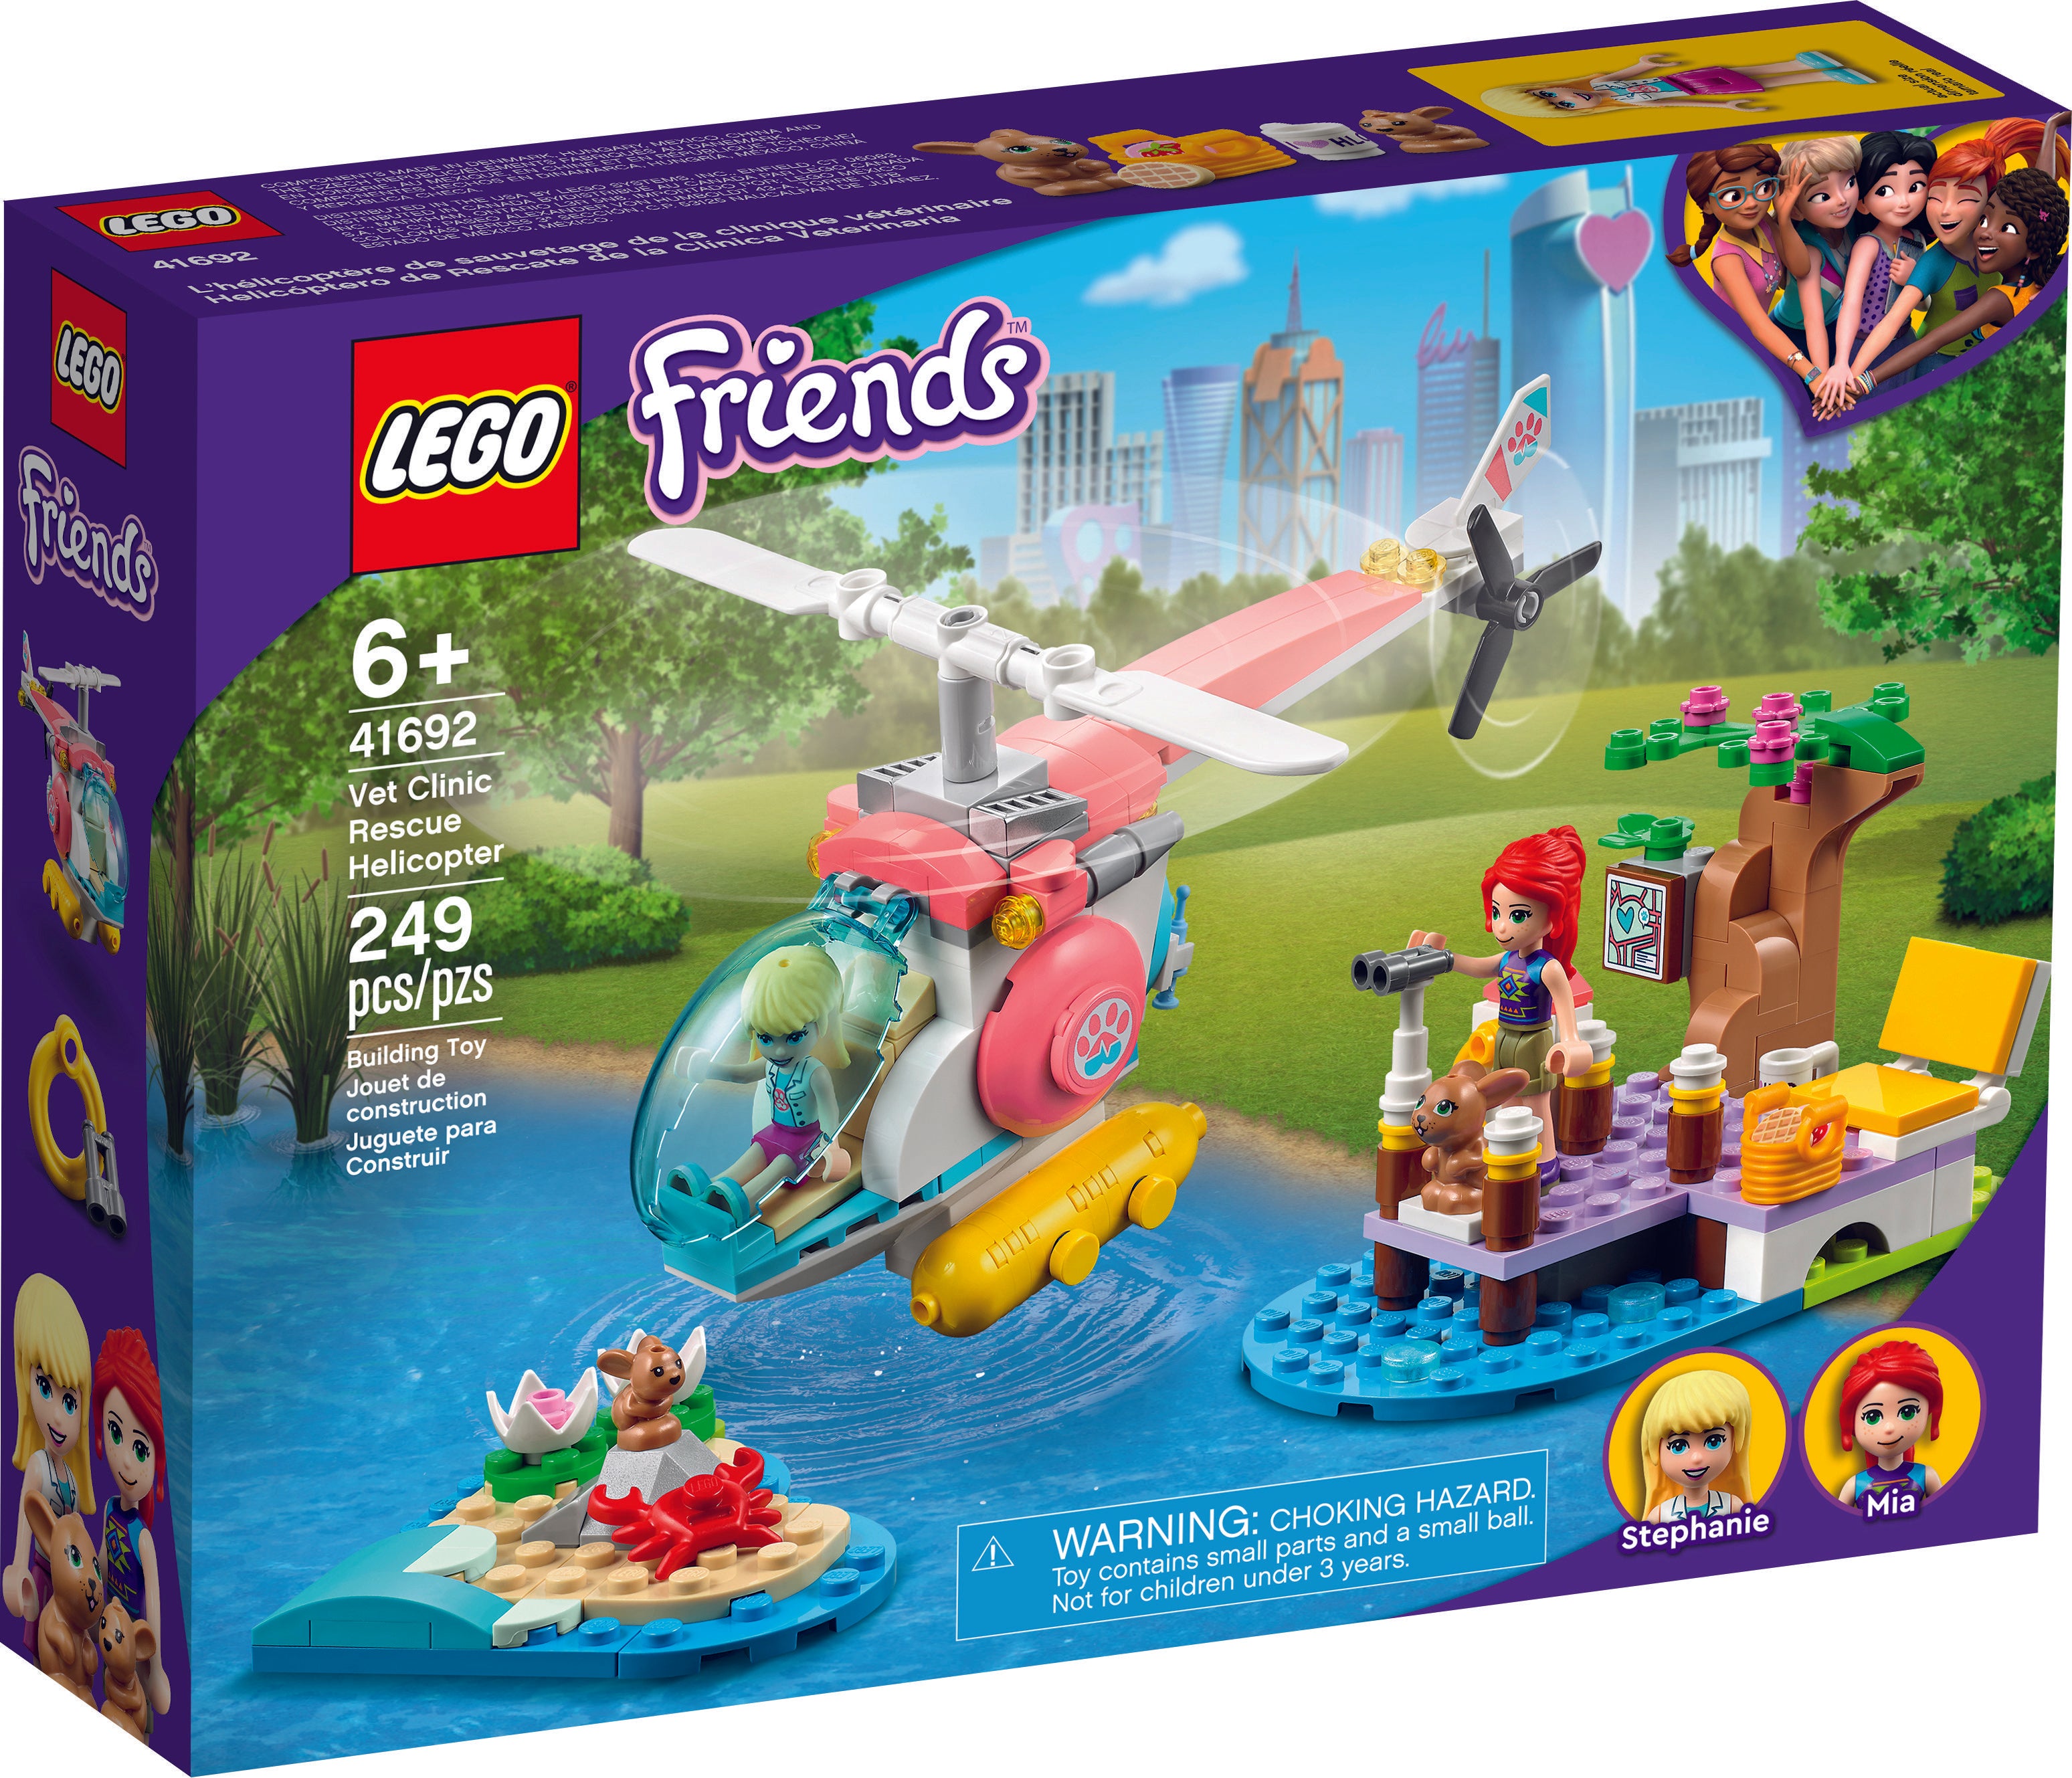 LEGO: Friends - Vet Clinic Rescue Helicopter